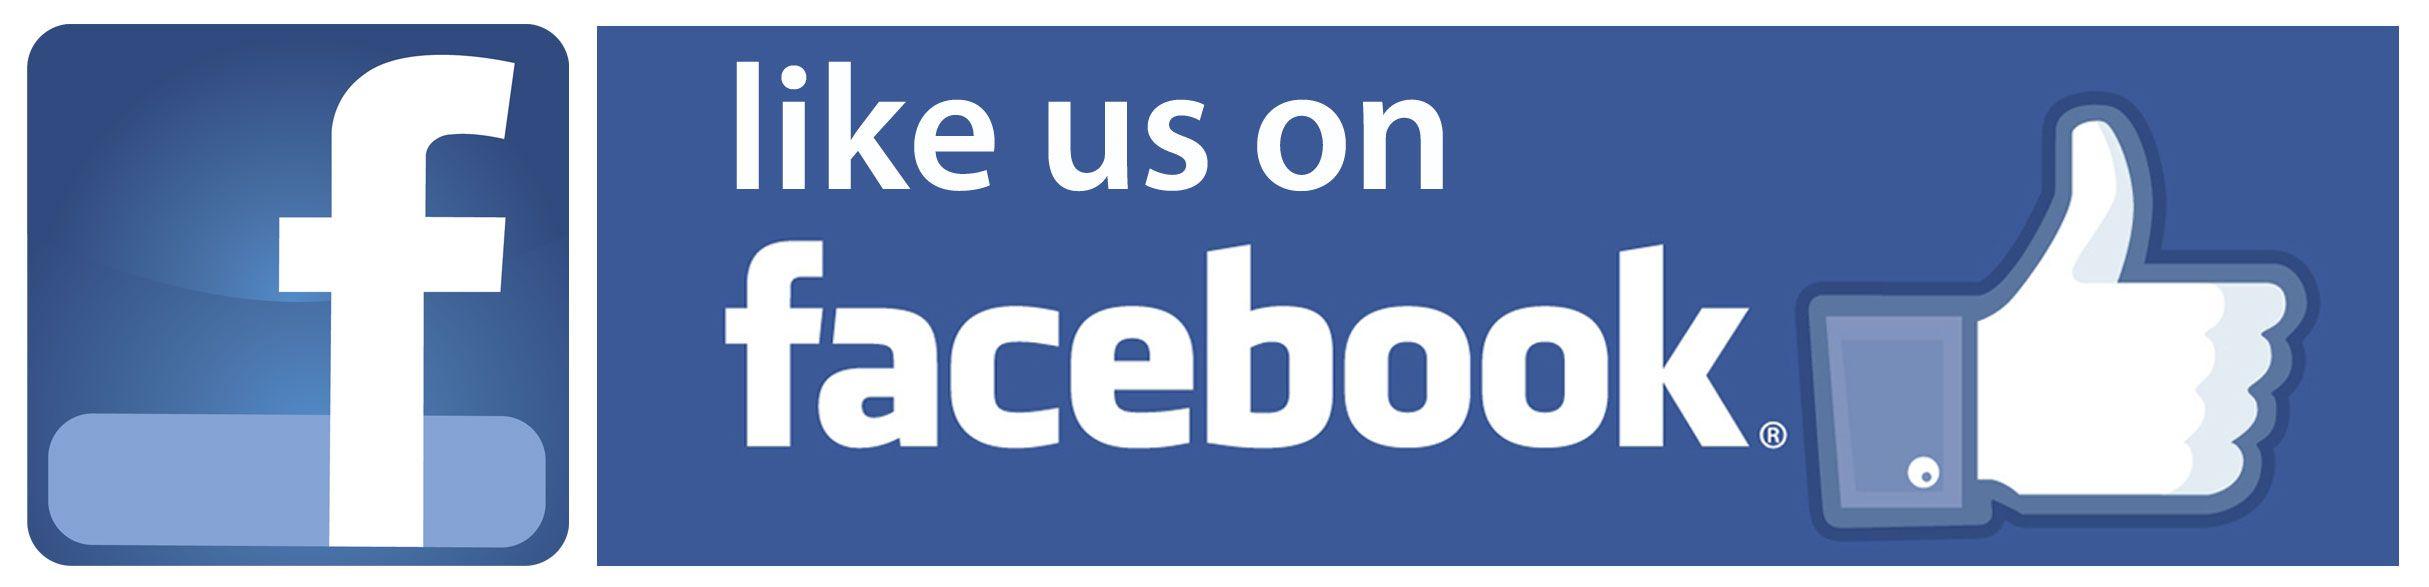 Like Us On Facebook Logo - Facebook Logo Transparent PNG Pictures - Free Icons and PNG Backgrounds